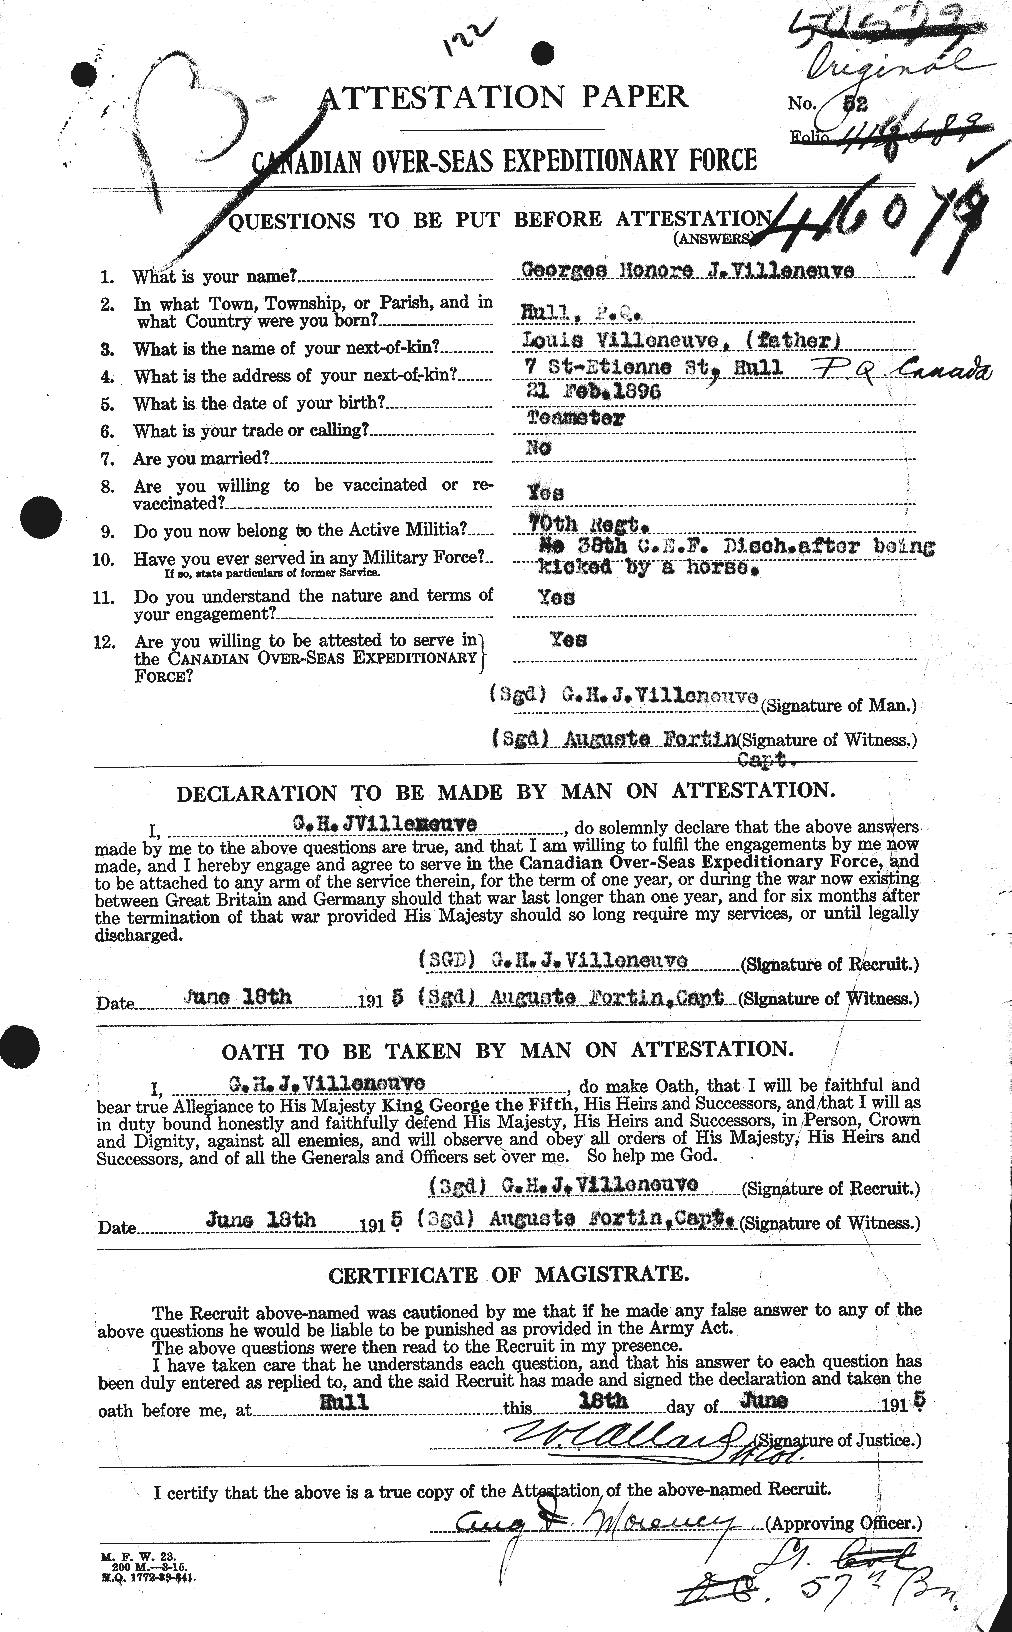 Personnel Records of the First World War - CEF 653828a